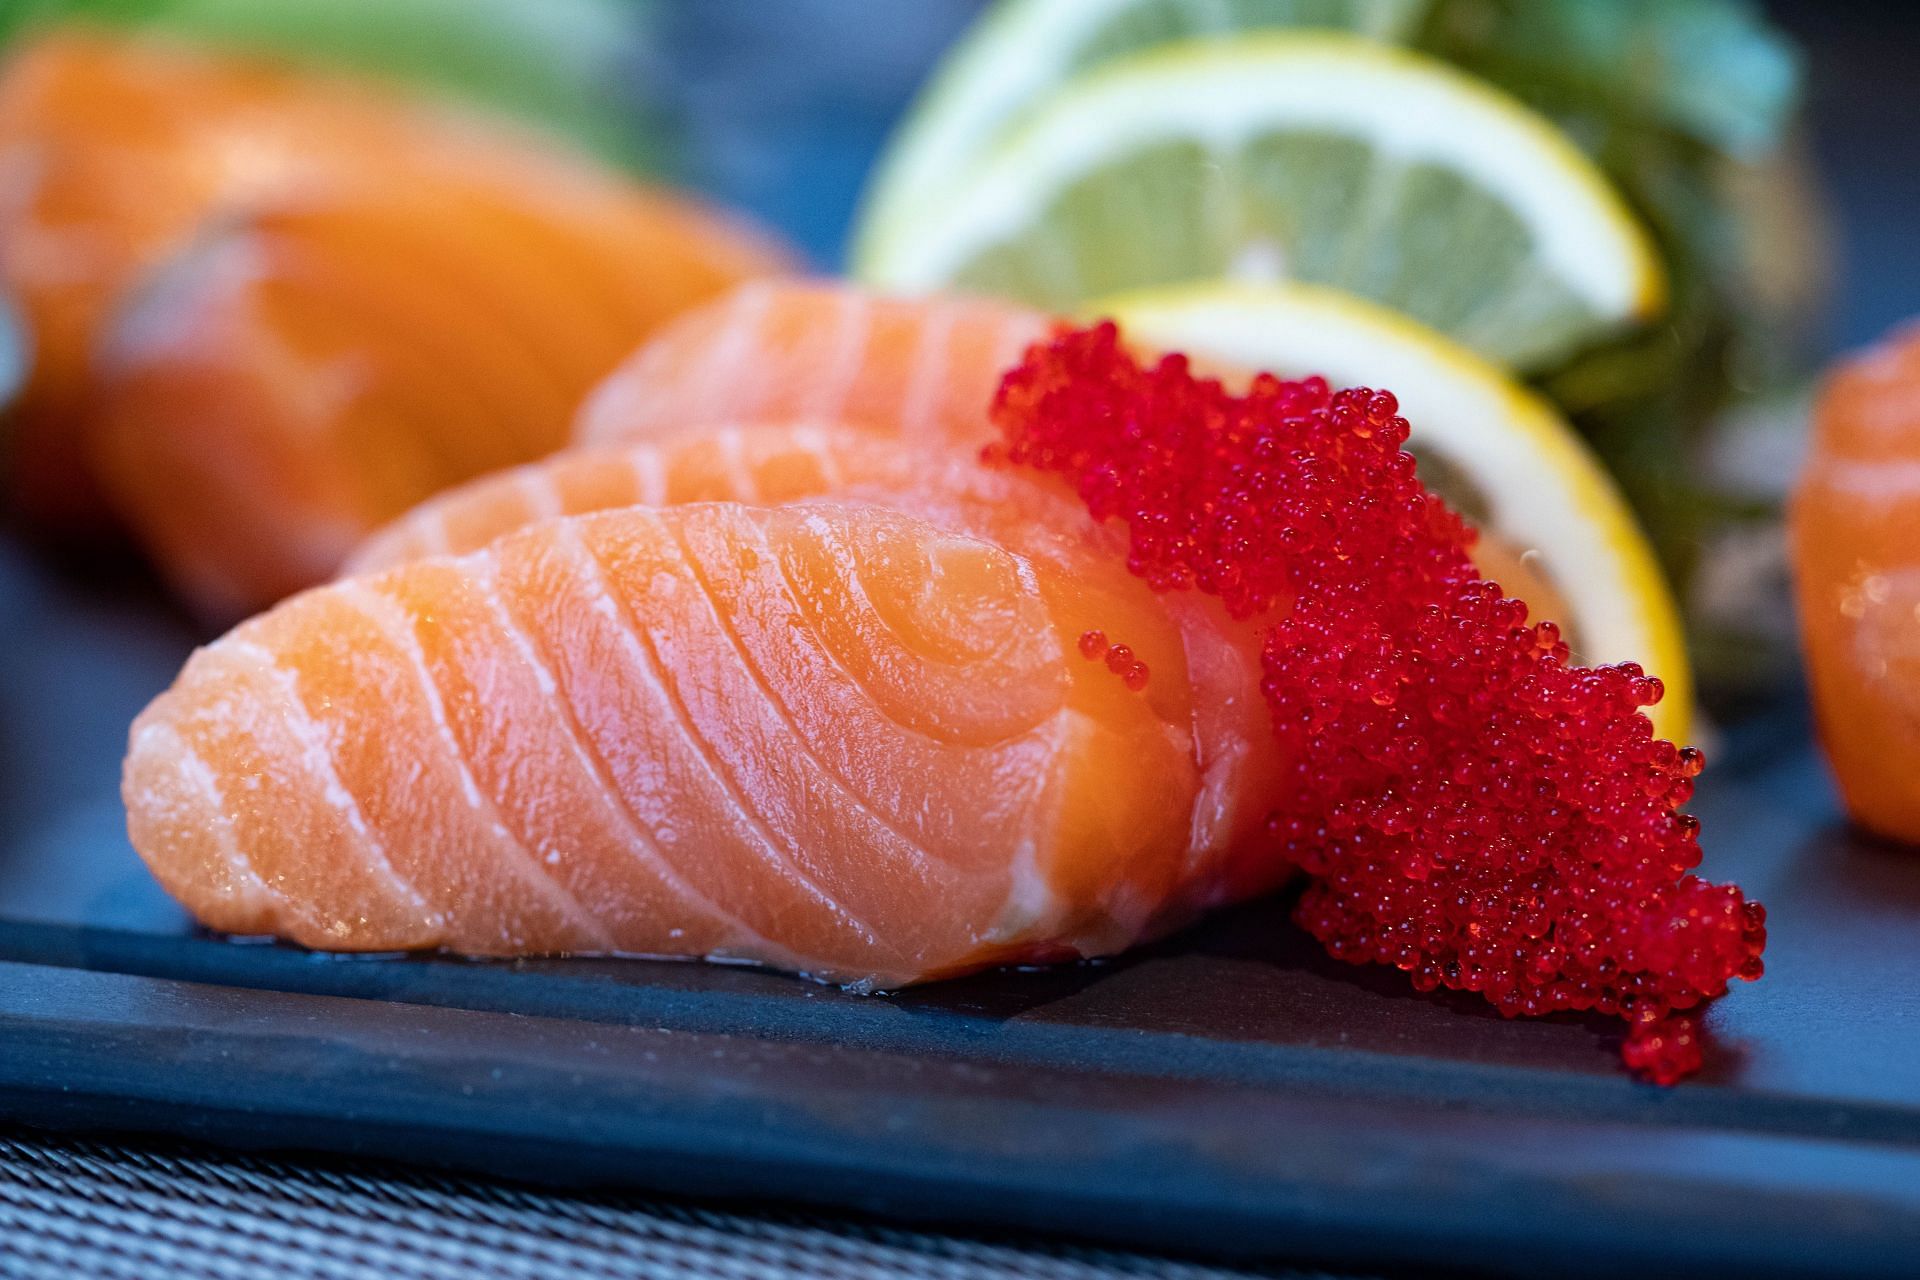 Salmon is a a great source of pyridoxine, which helps maintain a healthy heart. (Image via Pexels)